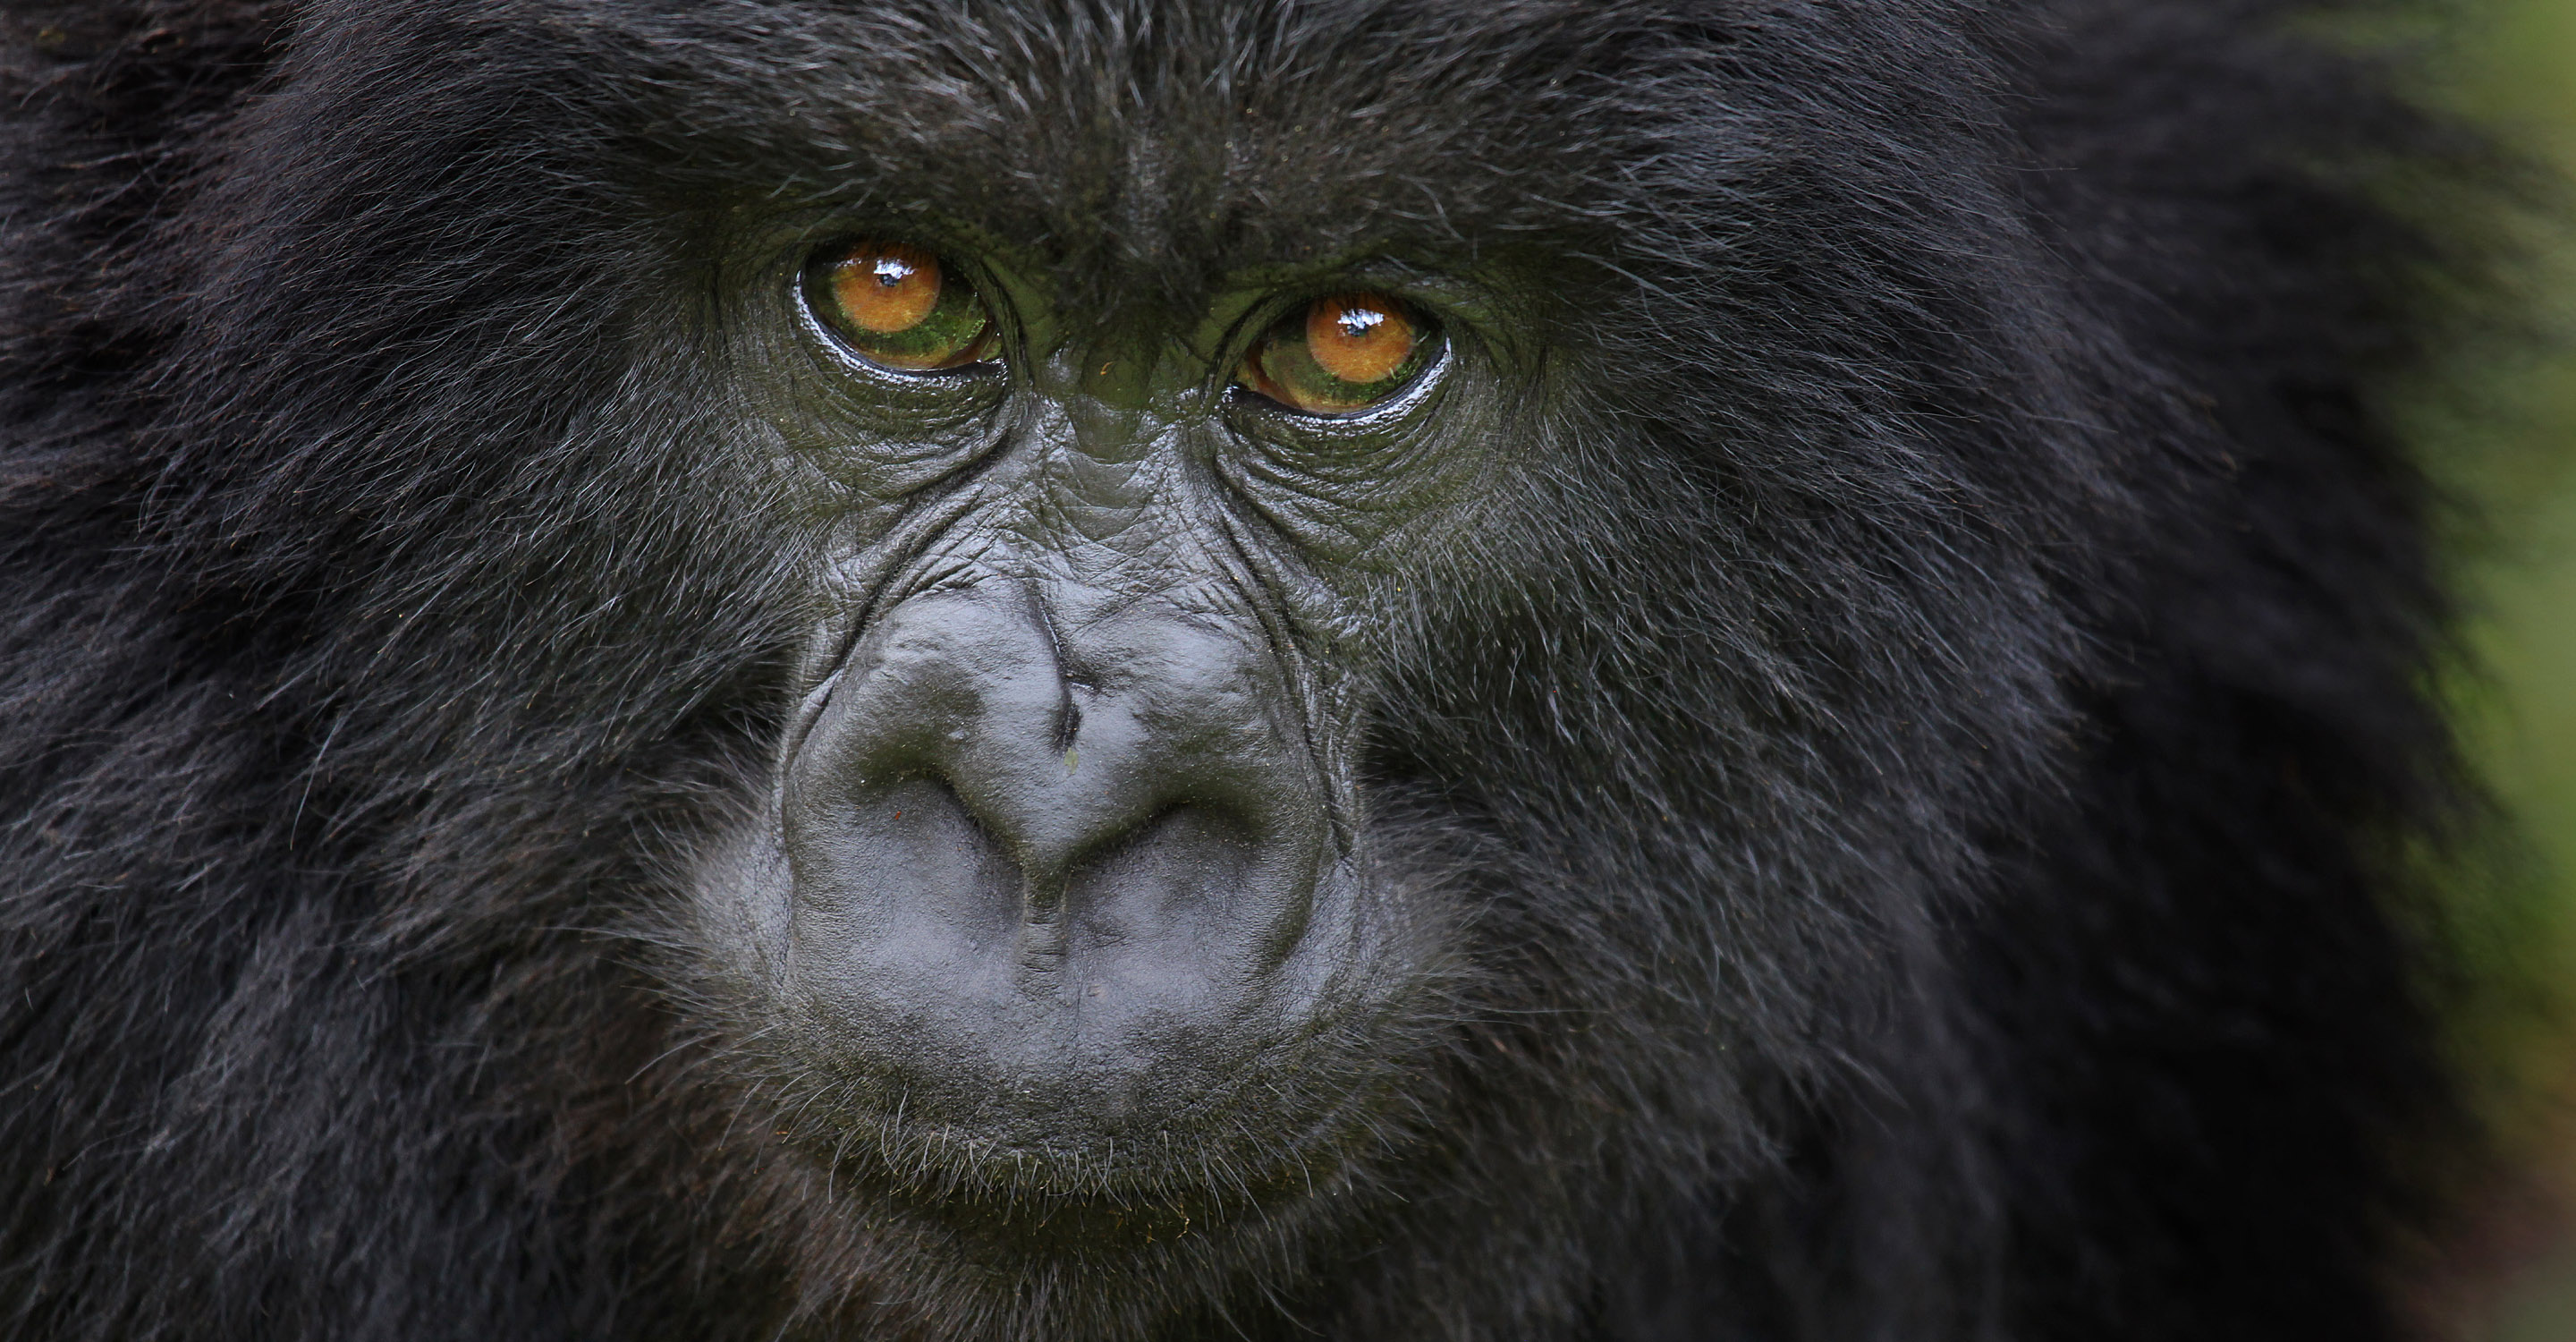 Close-up of a young mountain gorilla in Bwindi Impenetrable National Park, Uganda